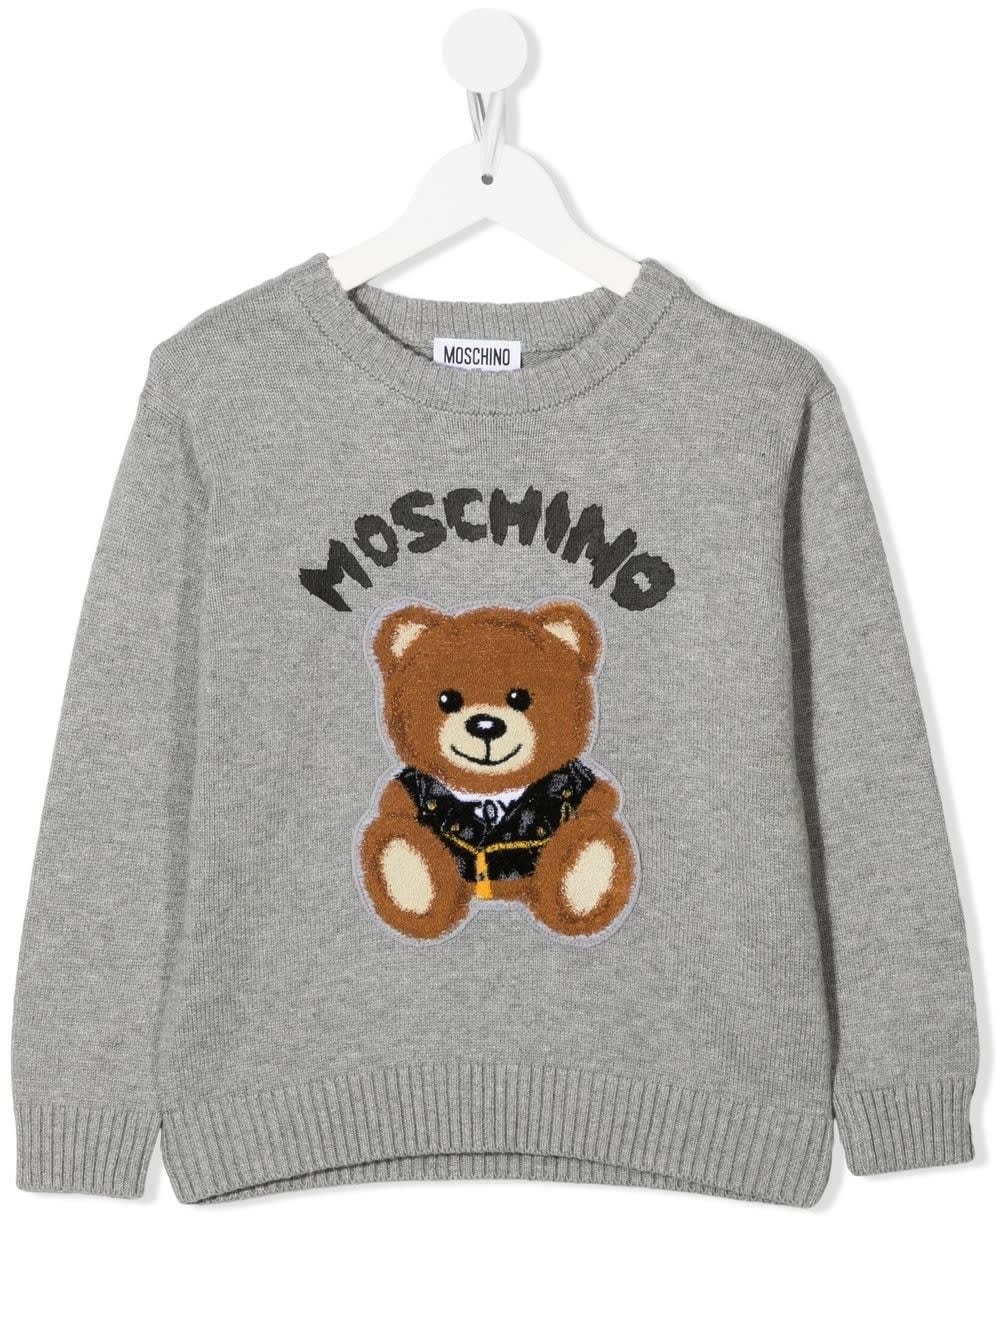 Grey Sweater With Moschino Teddy Bear Embroidery